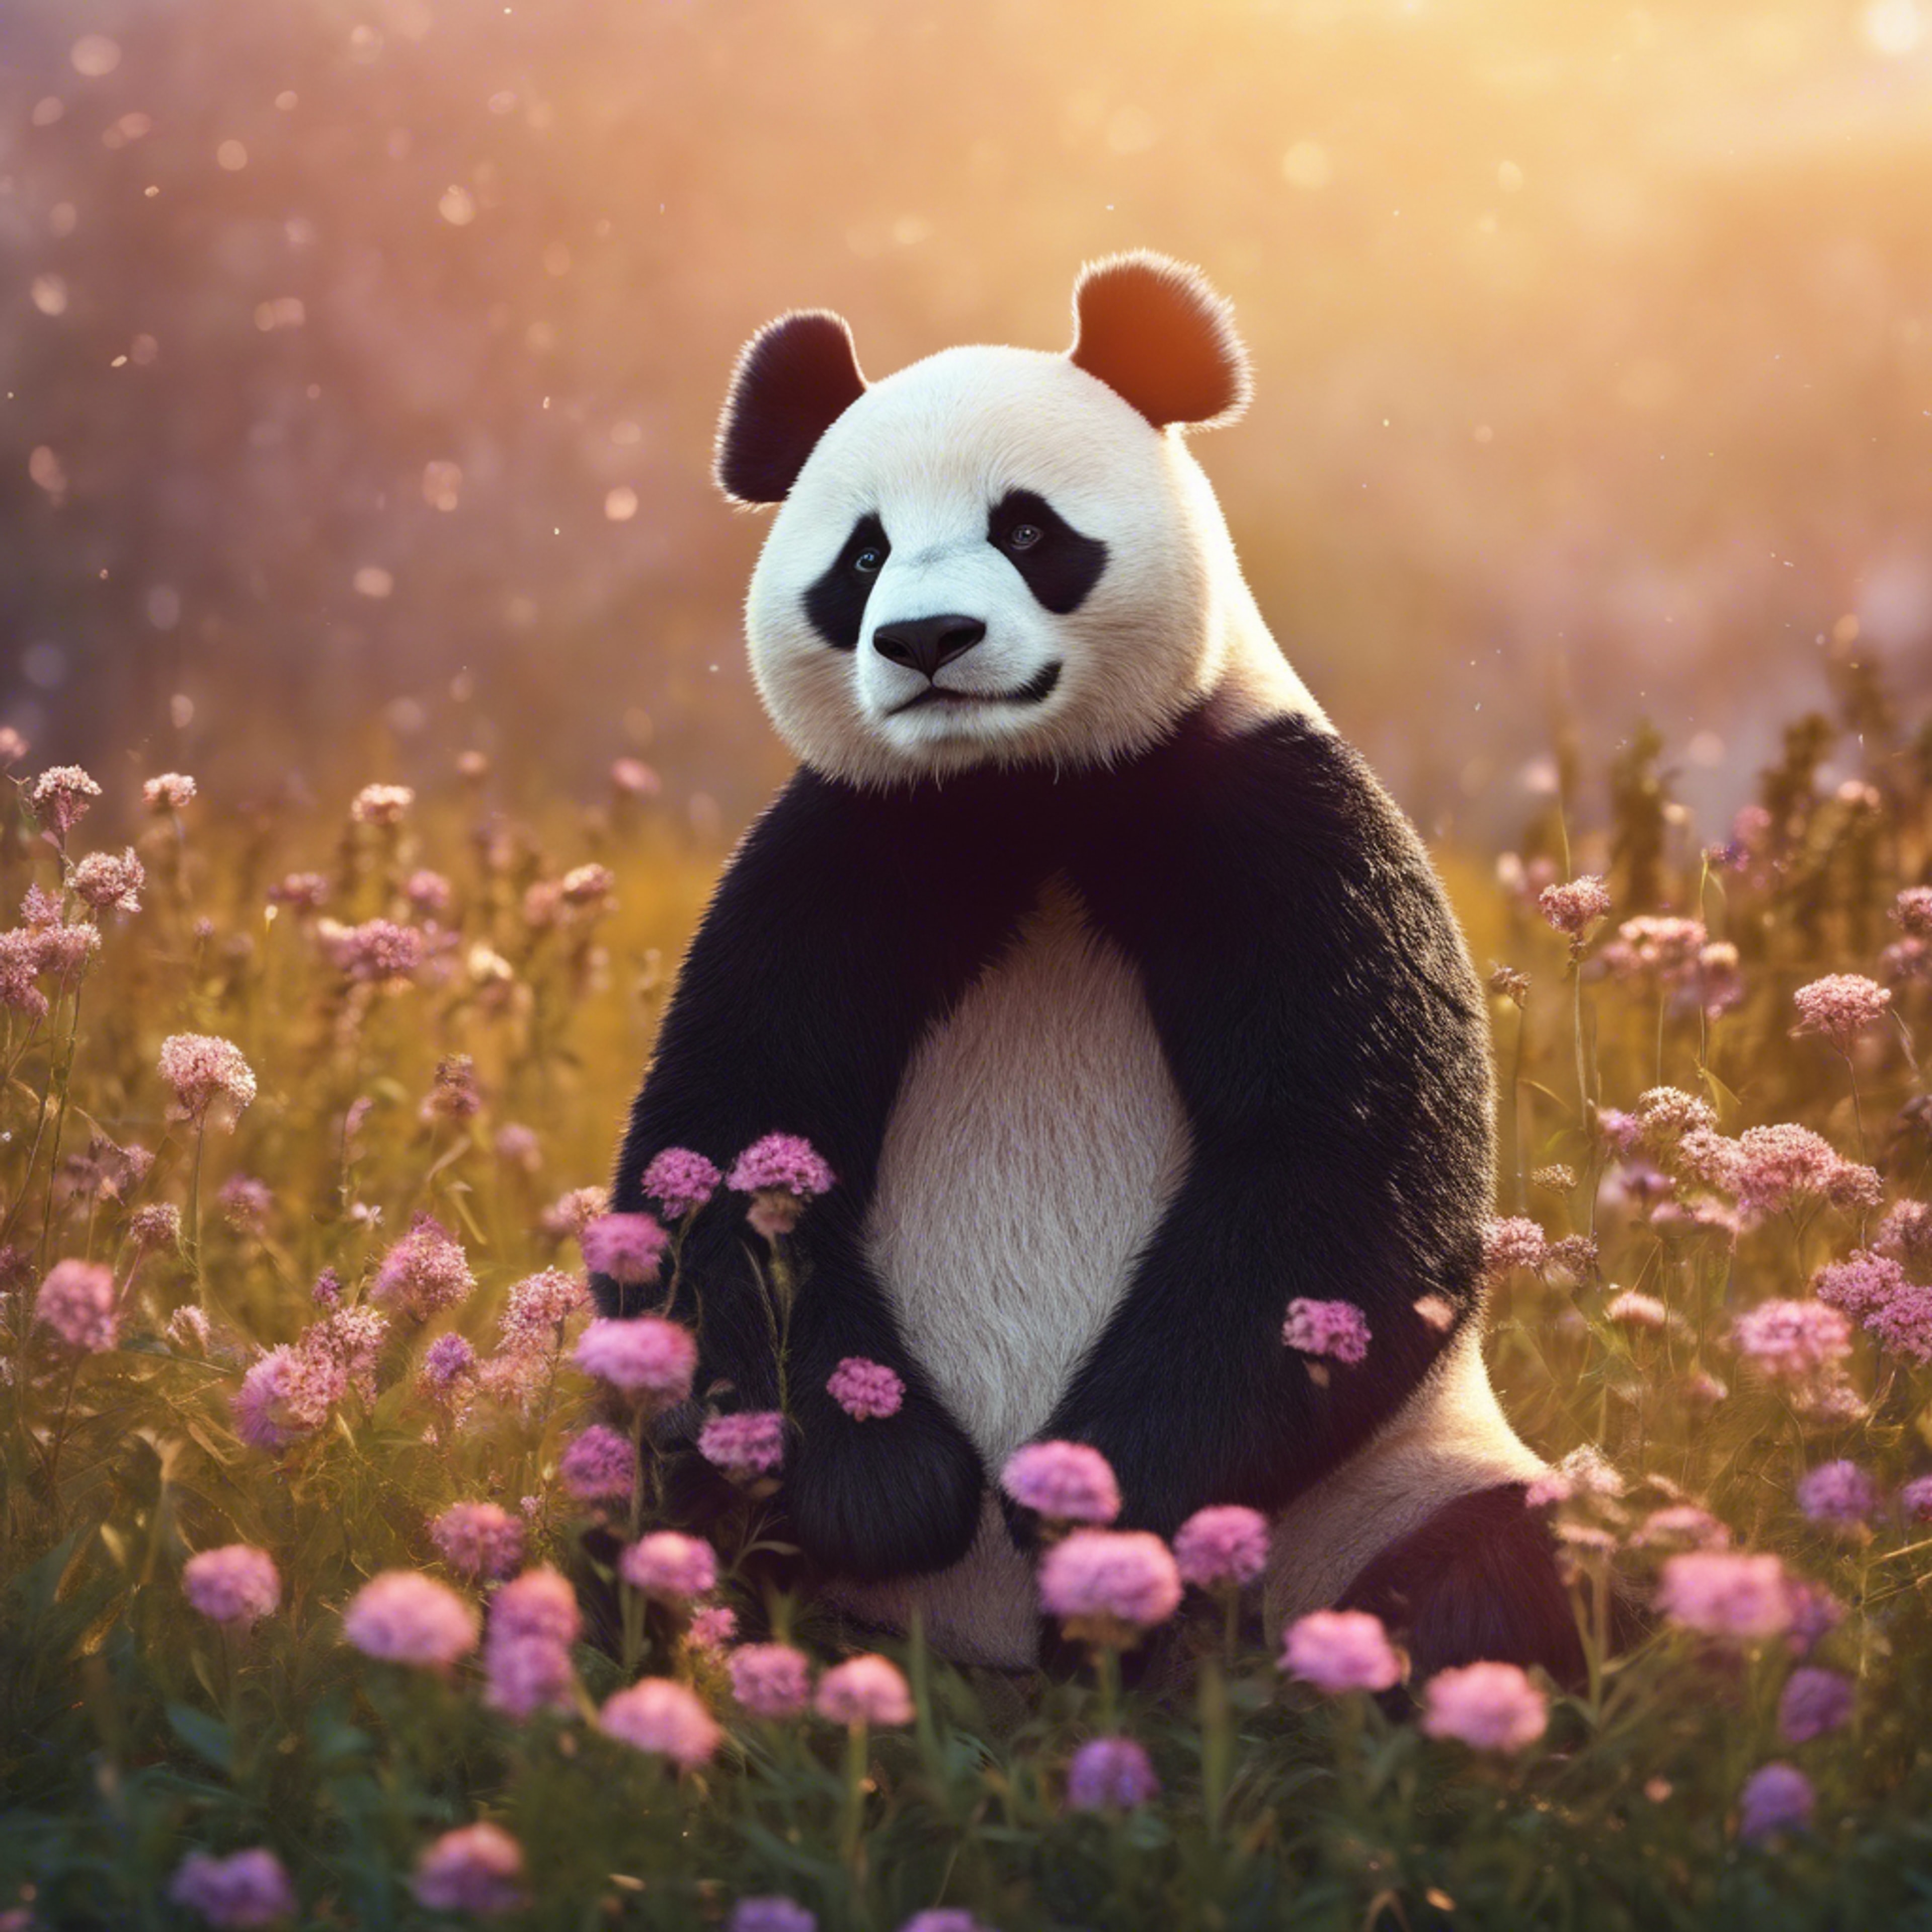 Beautiful illustration of a panda relaxing under the glow of the setting sun, surrounded by a field of wildflowers. Tapeta[4e88d1ee586942fa837d]